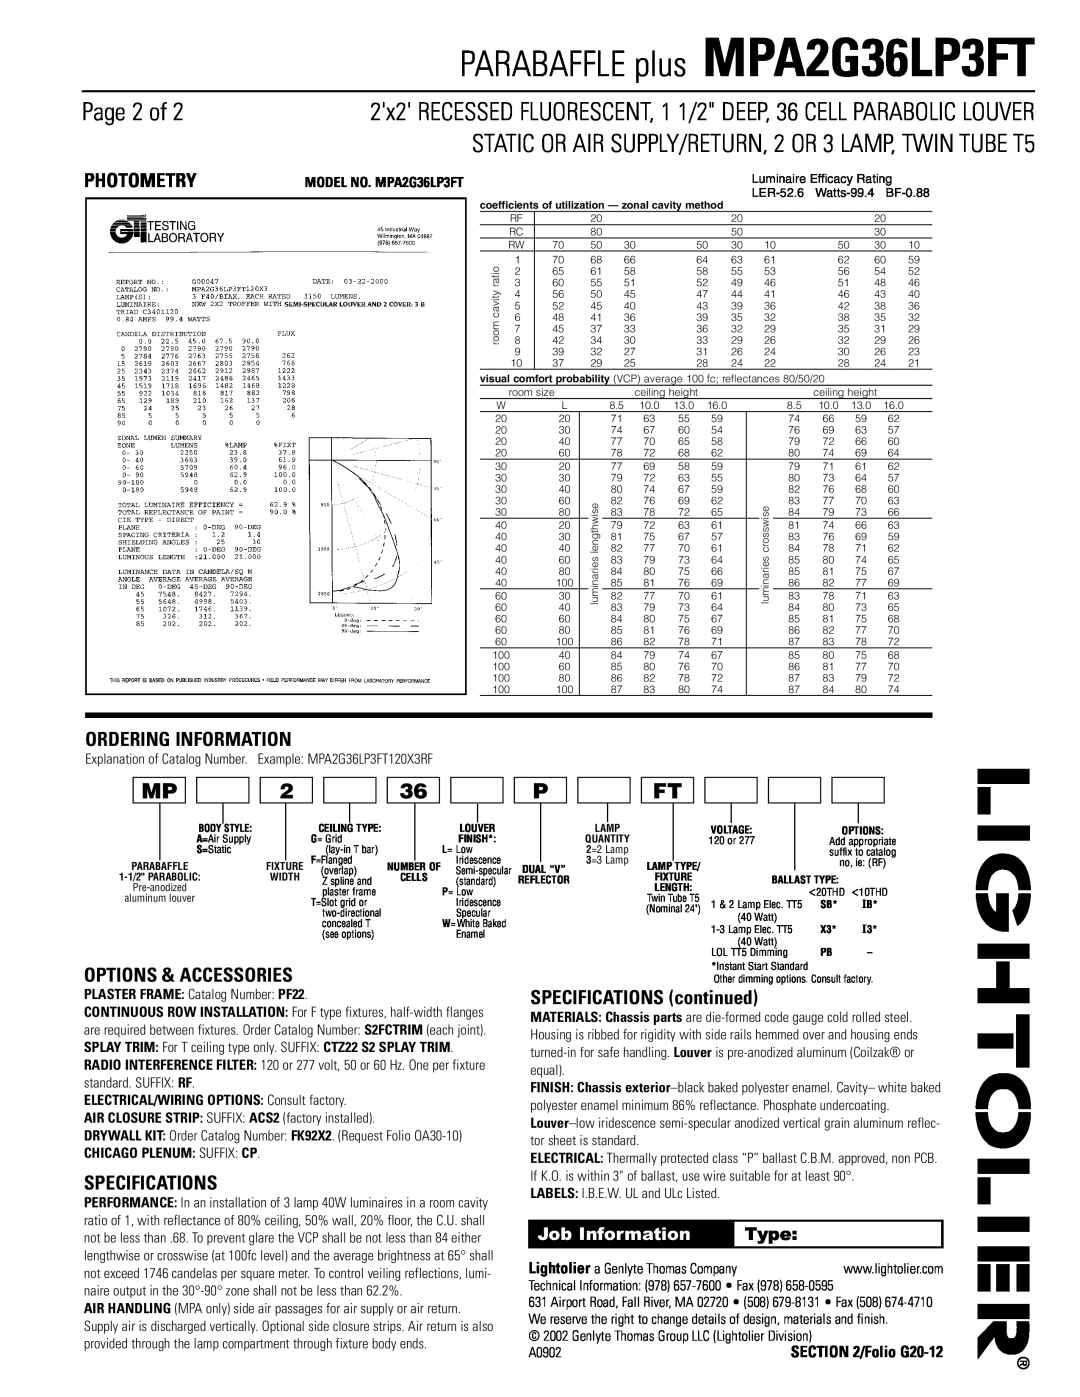 Lightolier MPA2G36LP3FT dimensions Page 2 of, Photometry, Ordering Information, Options & Accessories, Specifications, Type 